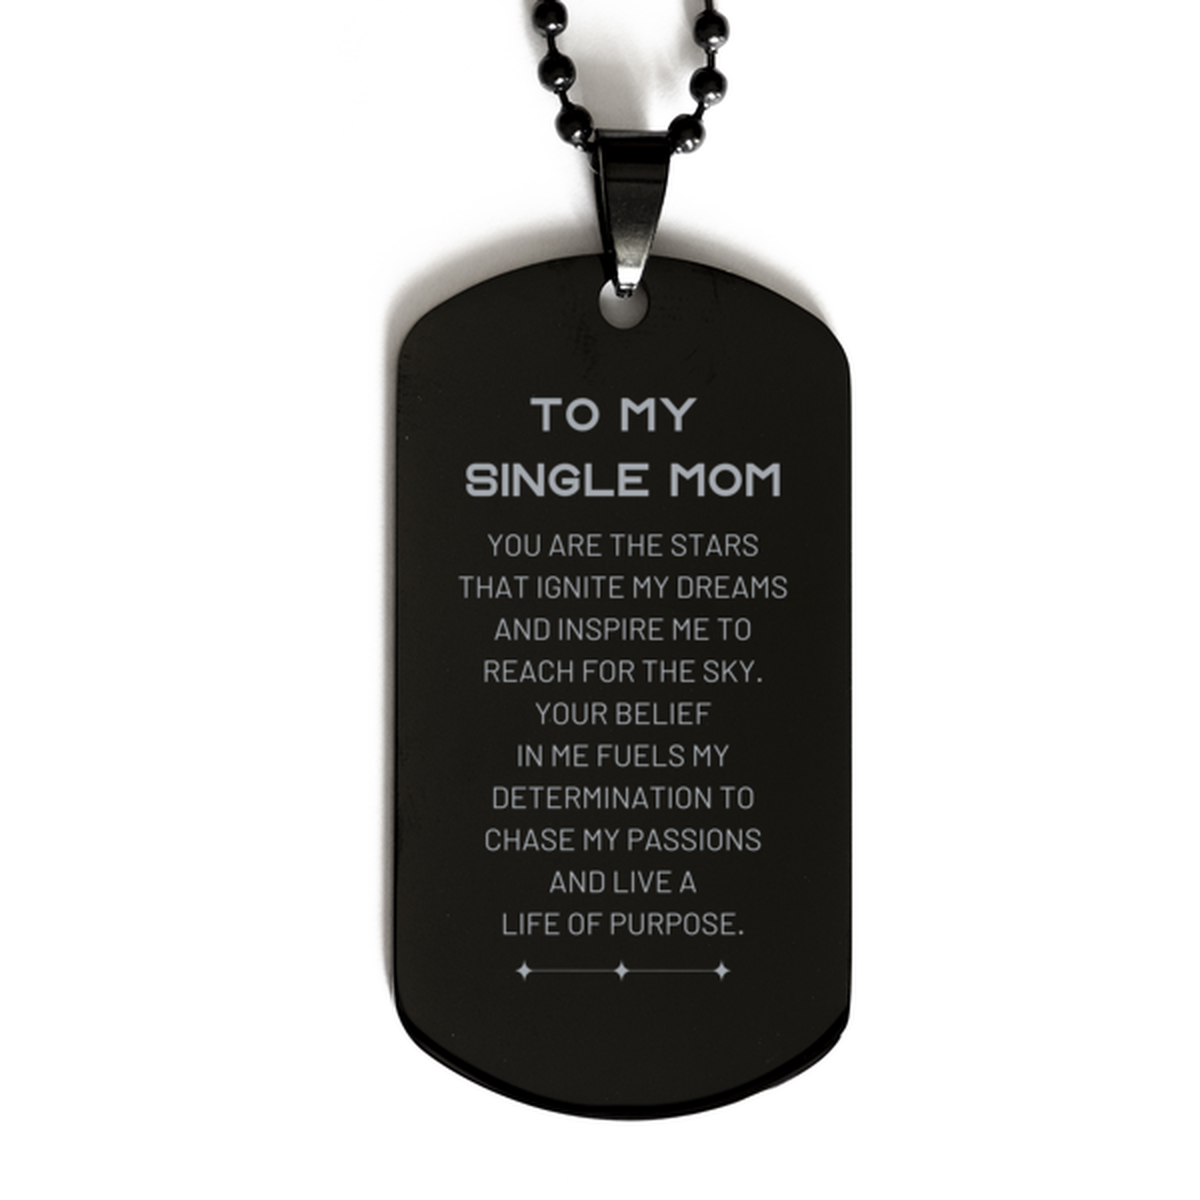 To My Single Mom Black Dog Tag, You are the stars that ignite my dreams and inspire me to reach for the sky, Birthday Unique Gifts For Single Mom, Thank You Gifts For Single Mom